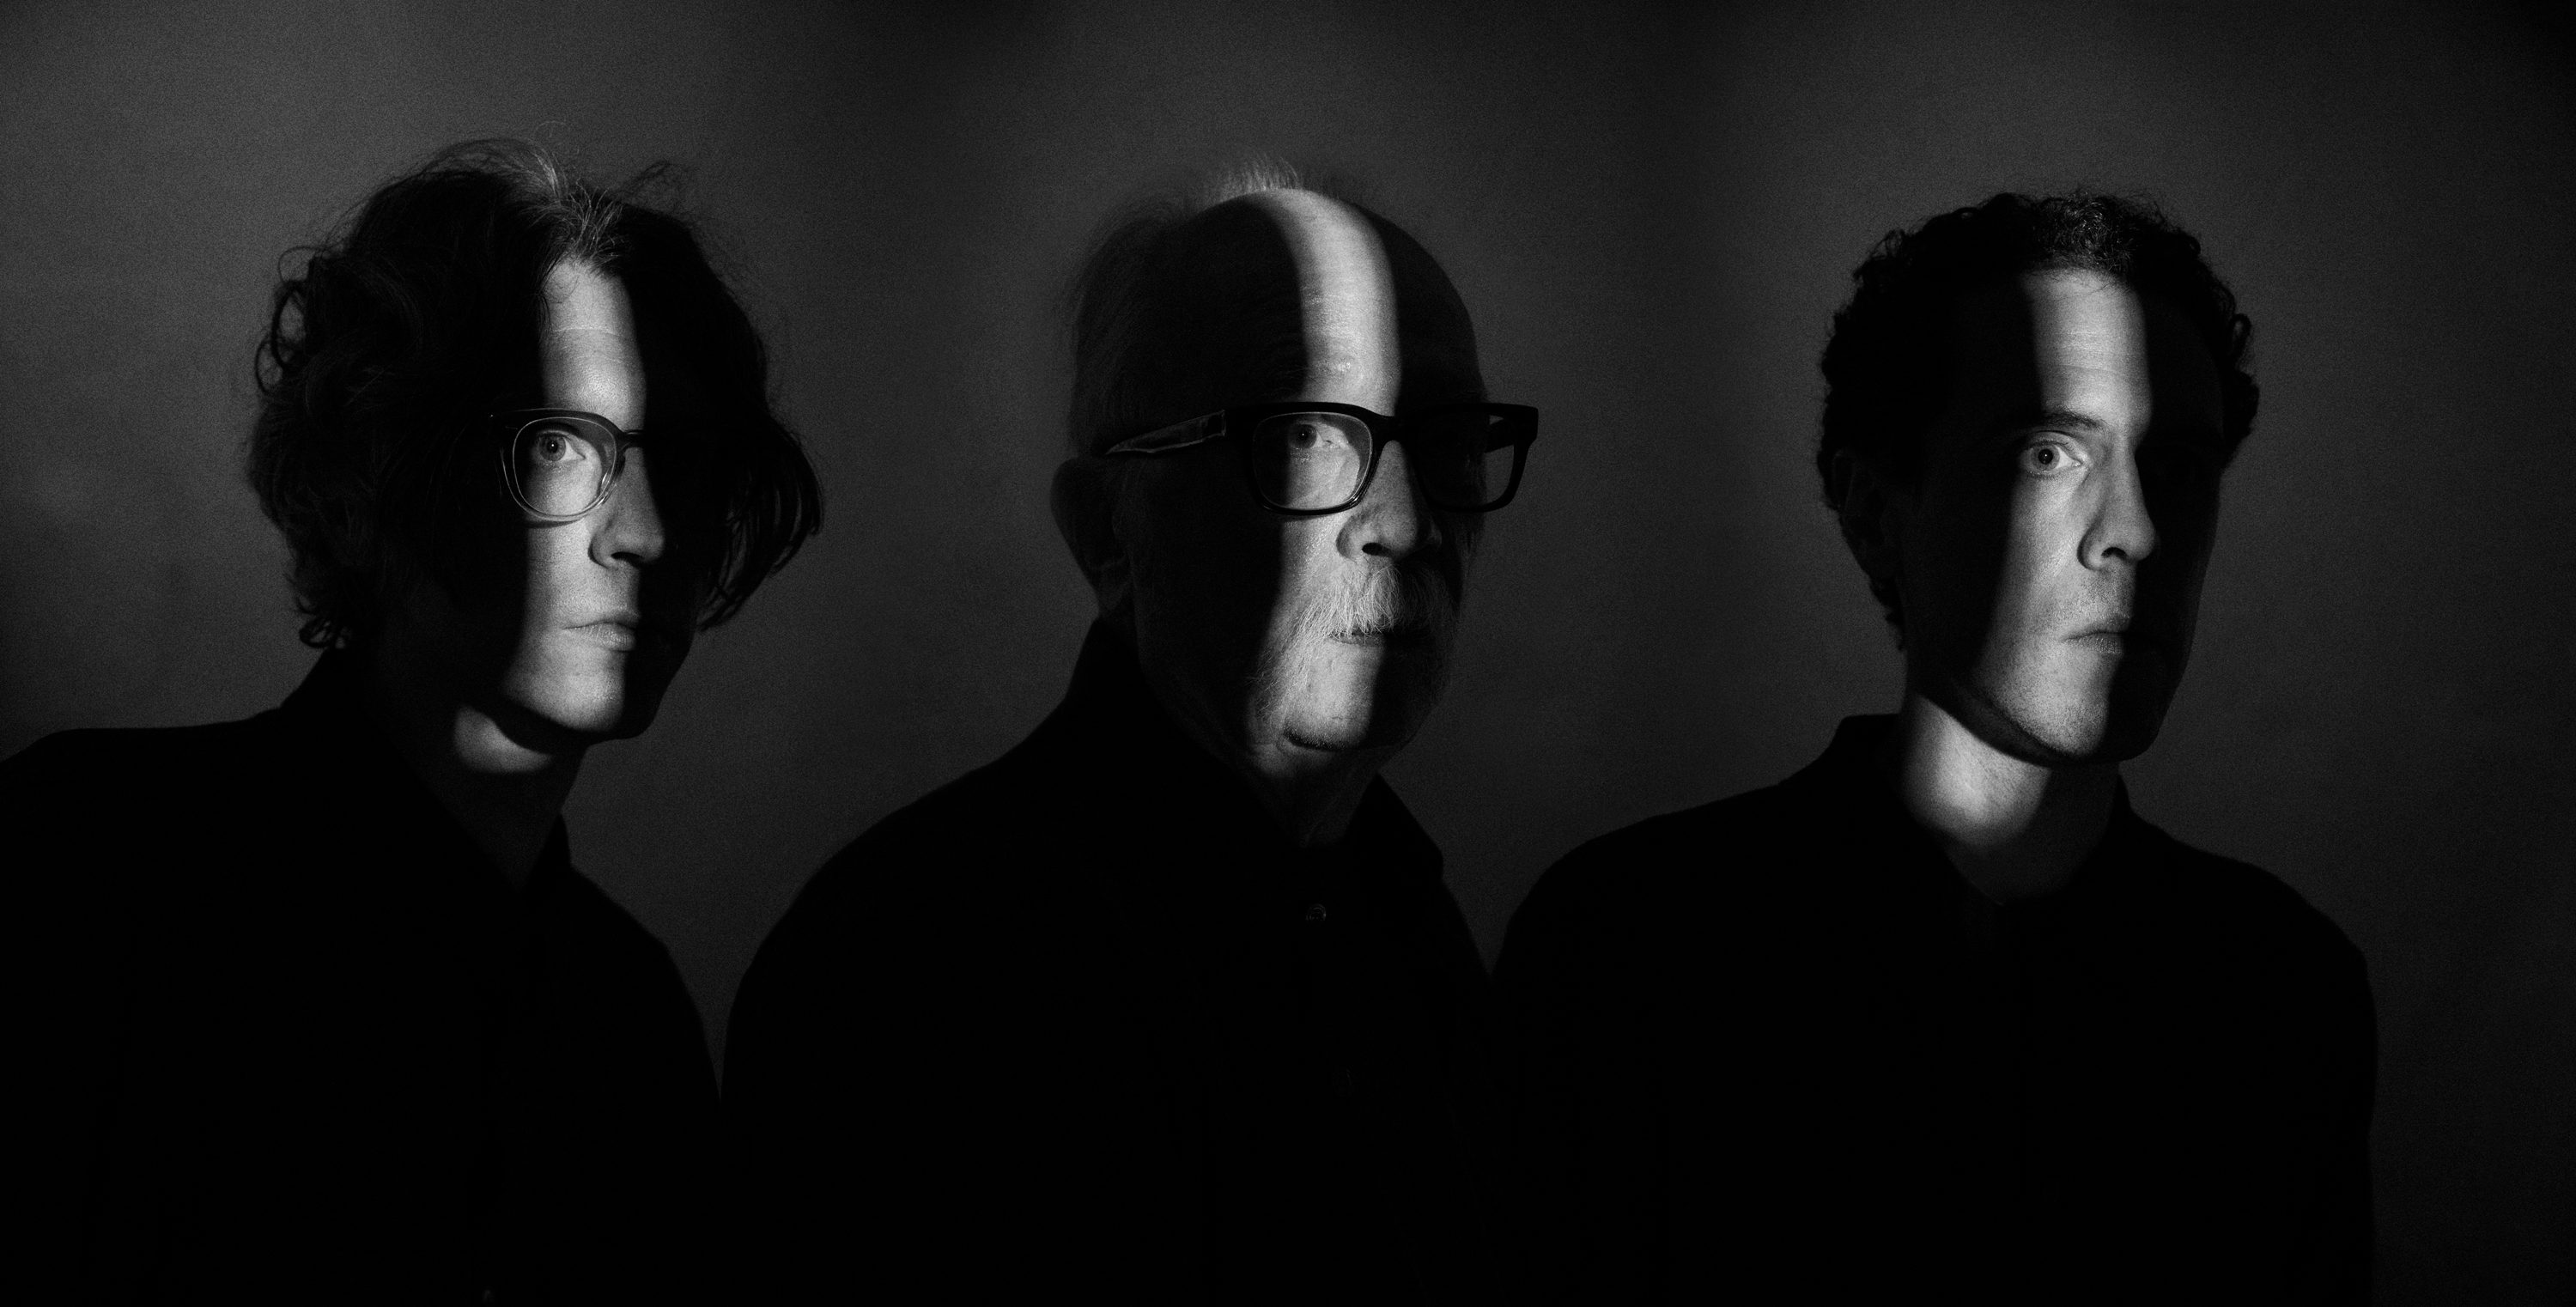 John Carpenter Enlists the Help of Family for ‘Lost Themes III’